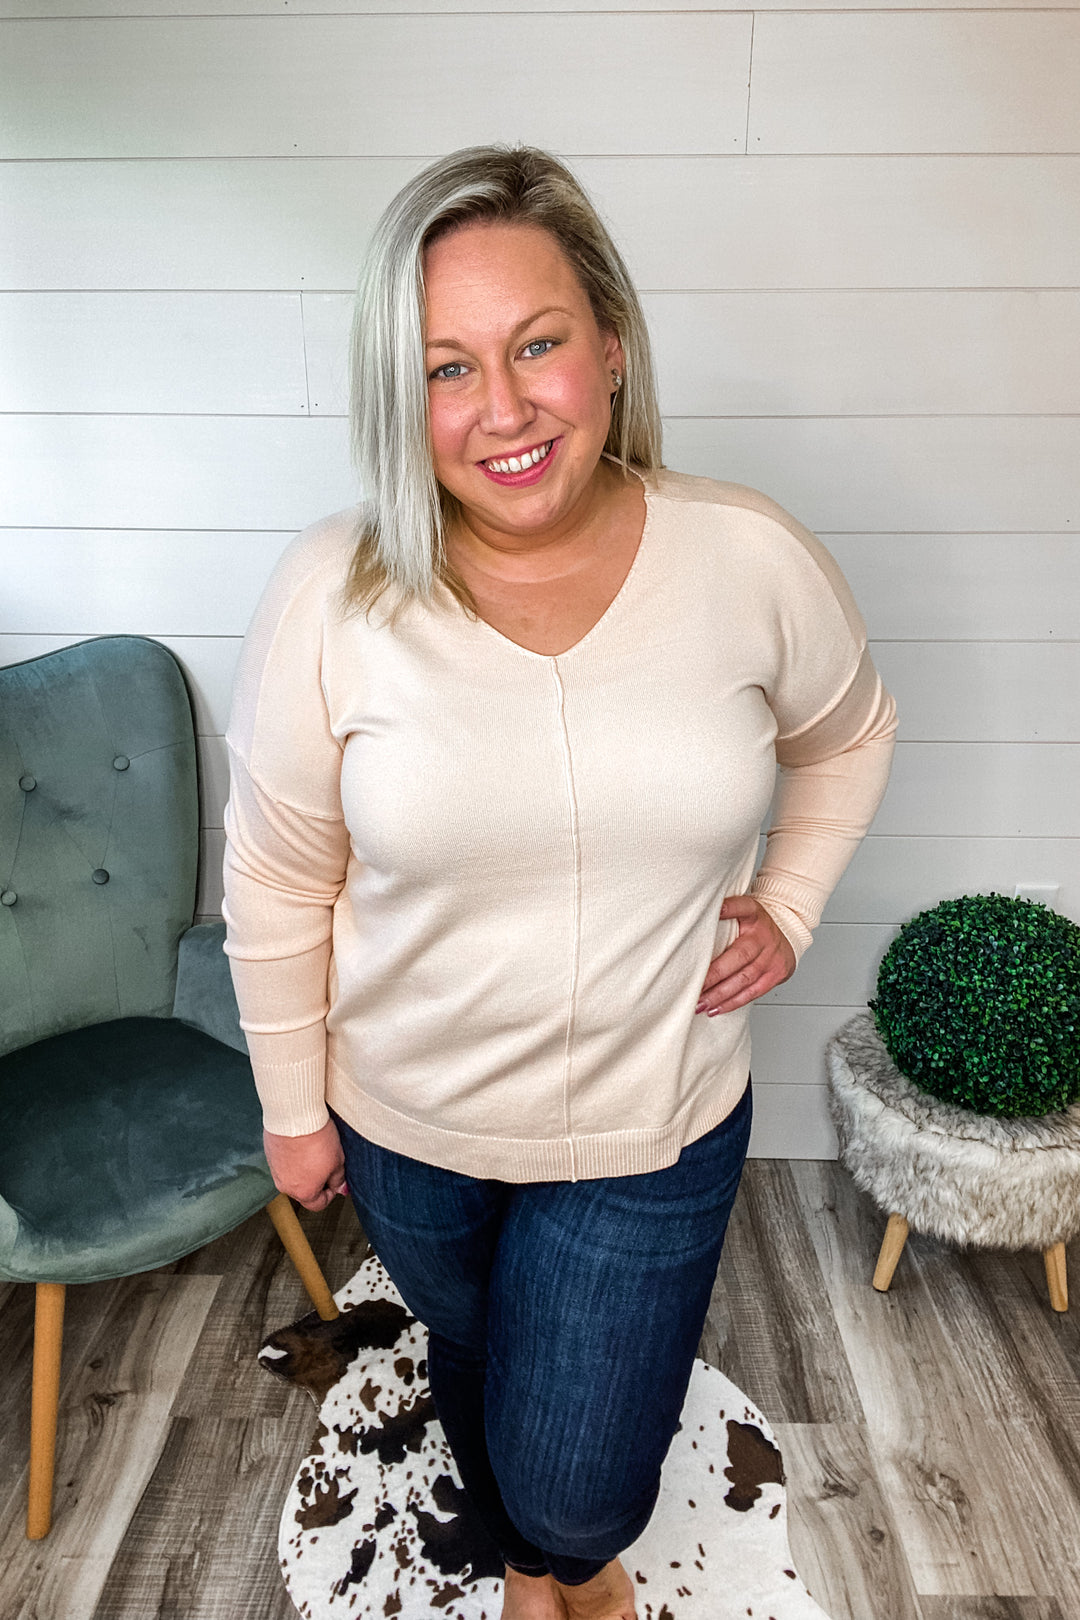 The Best Fall Basic Sweater in Dusty Blush